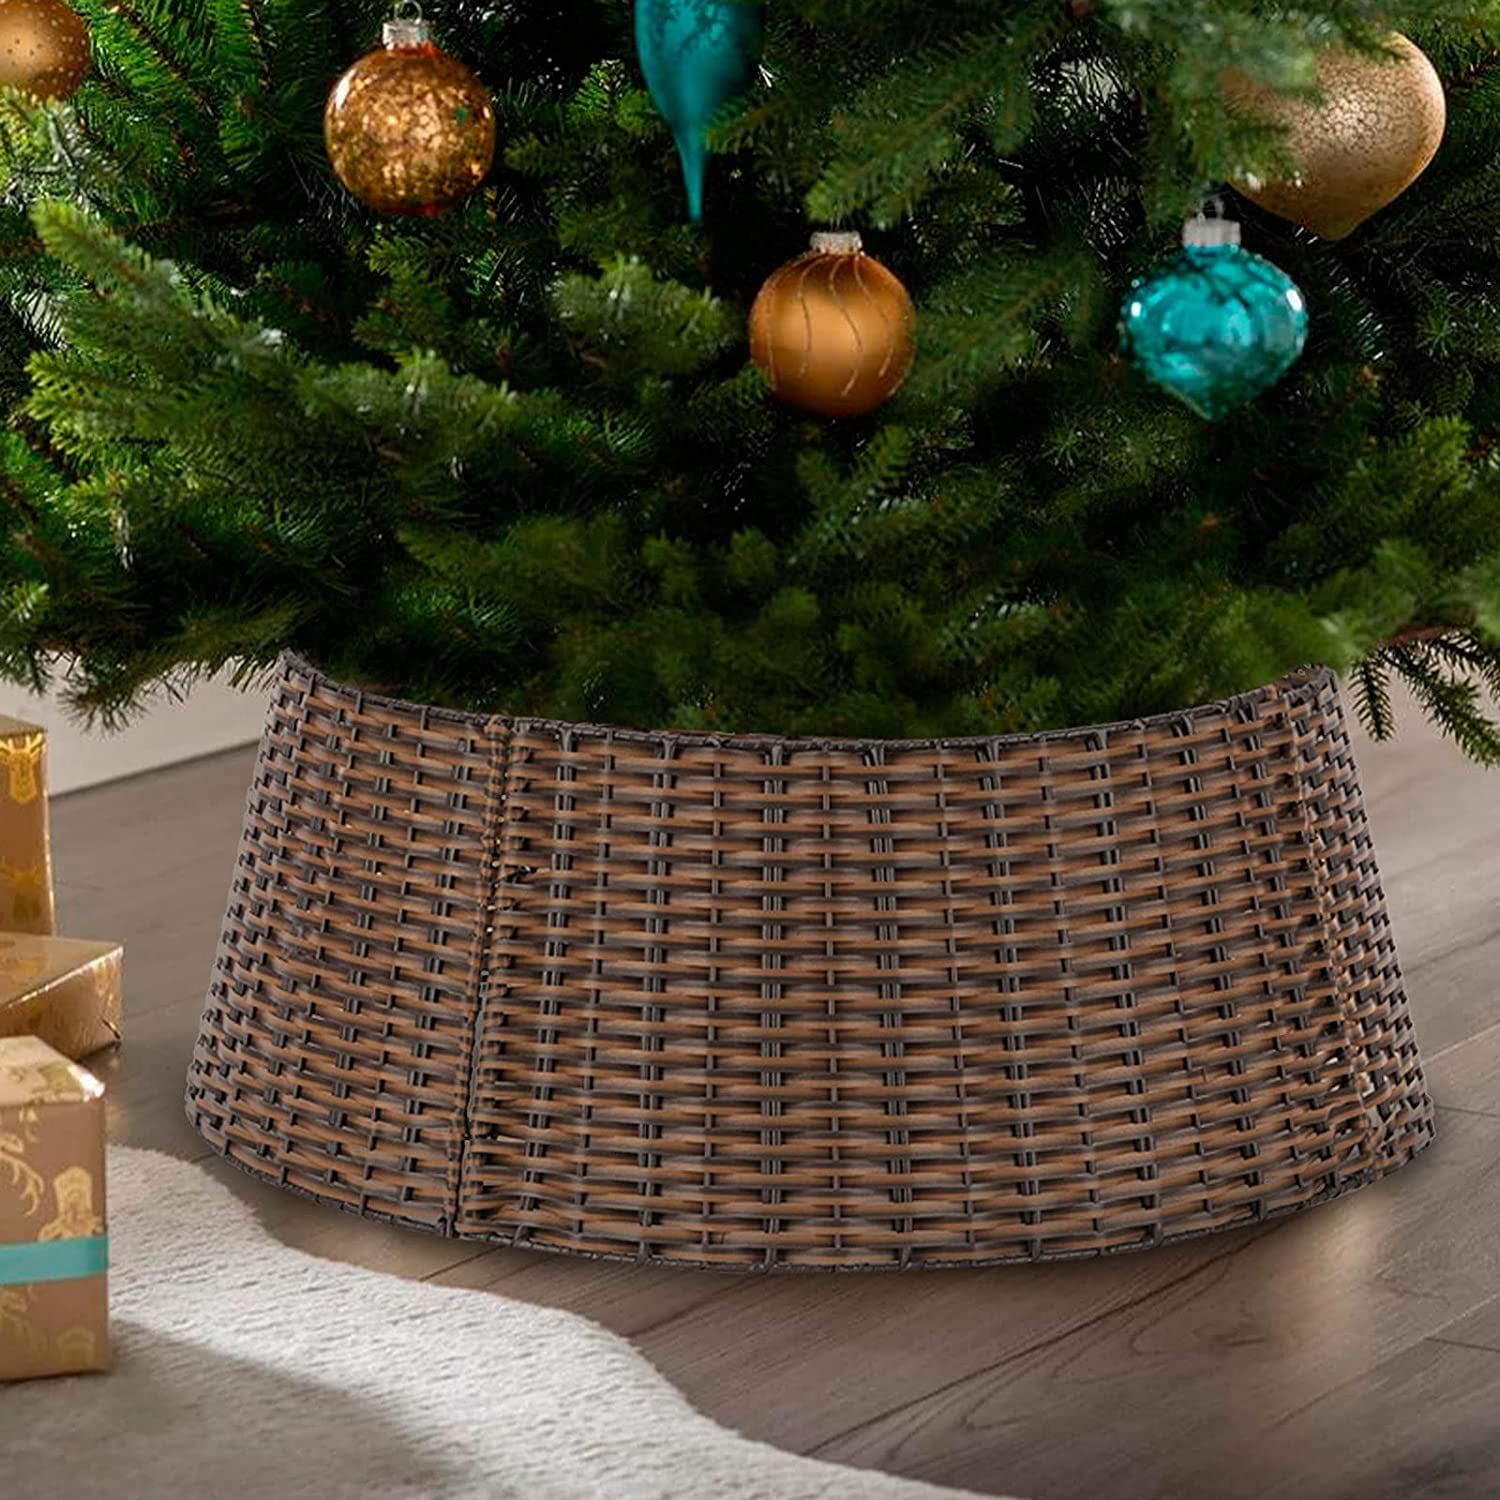 Wicker white Wash Christmas Tree Skirts Rattan Basket Cover Base In 4 Sizes